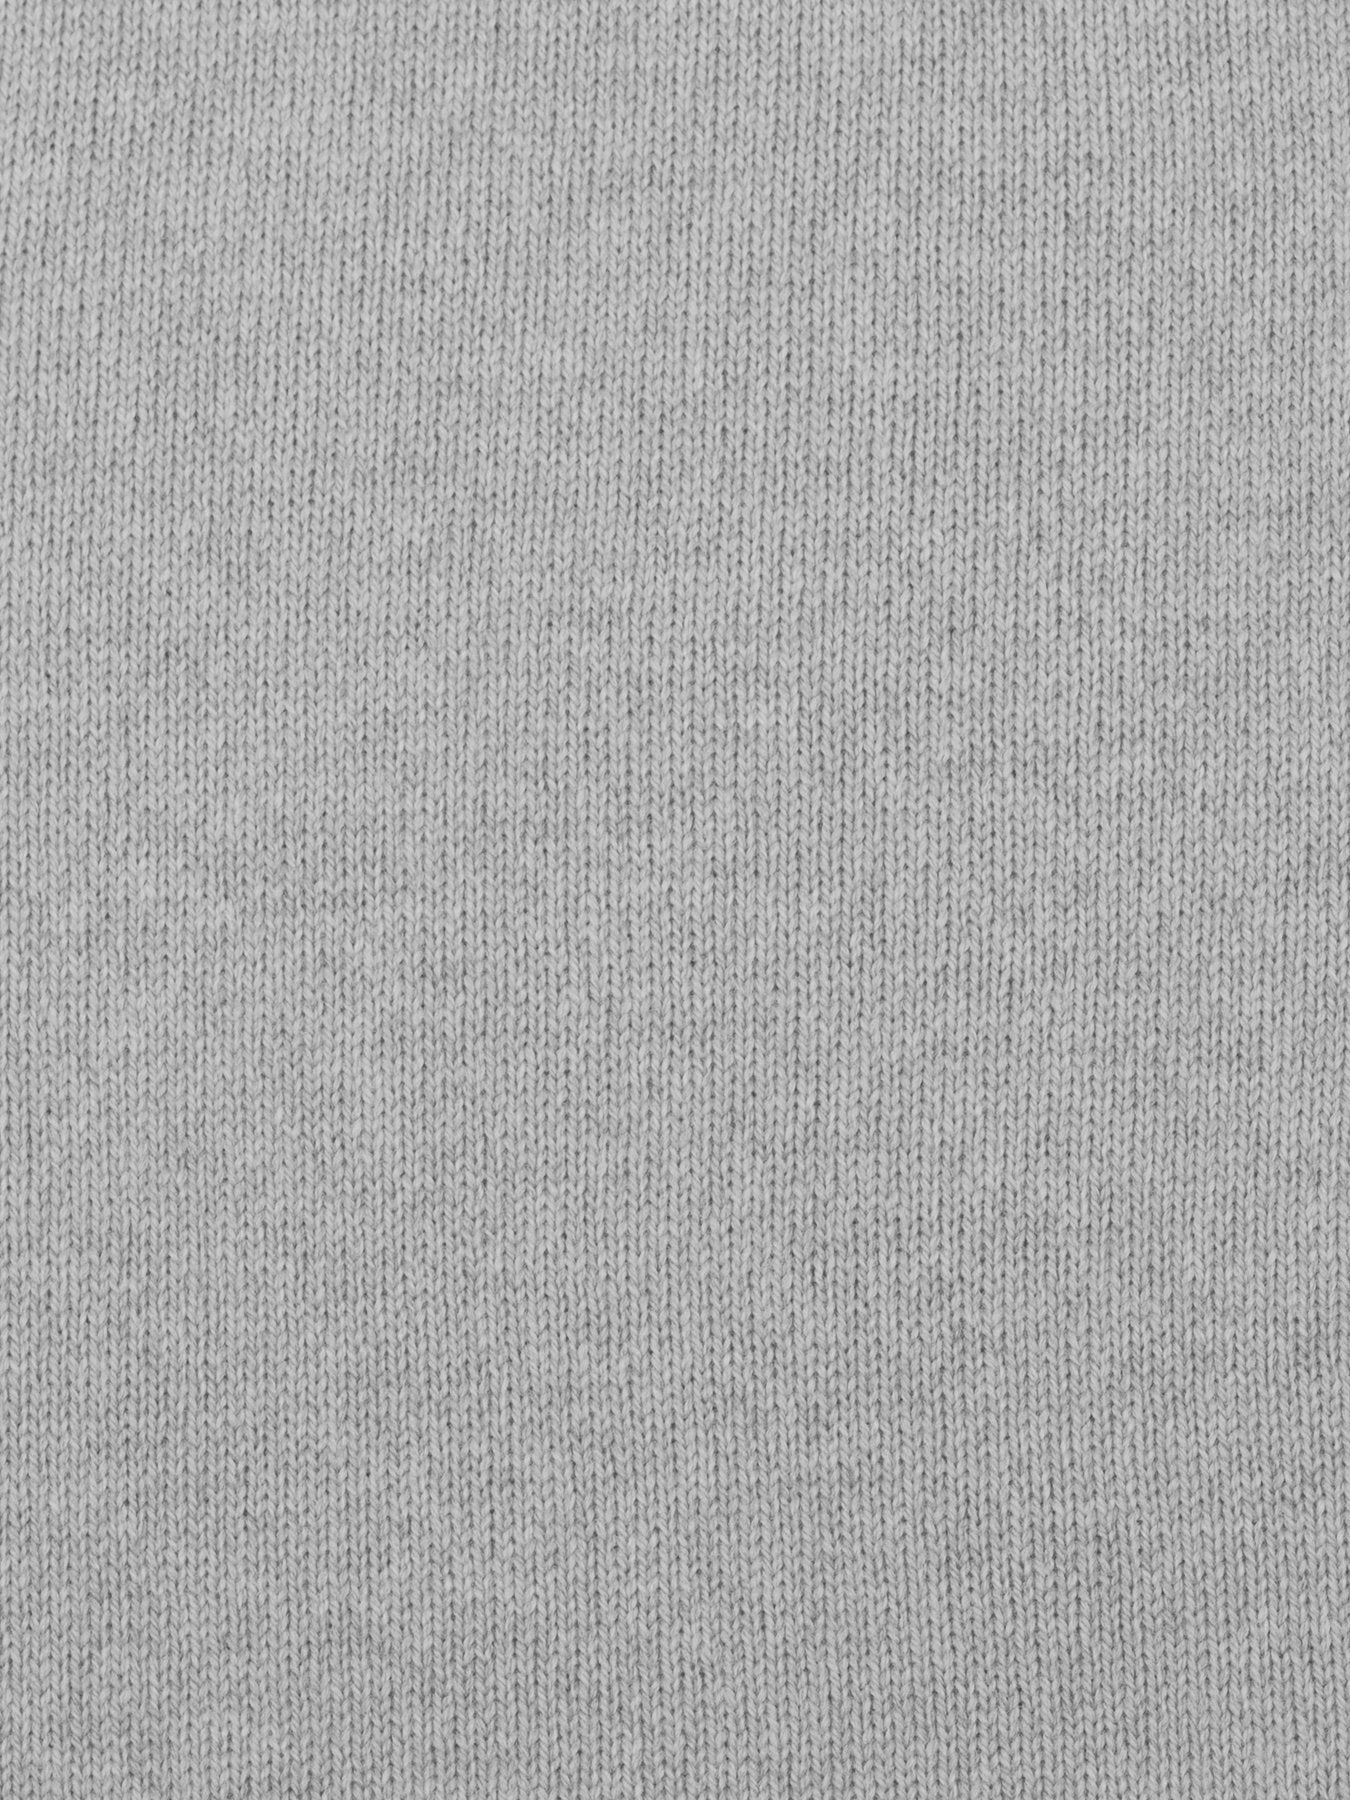 a swatch of plain single jersey knitting made from fine merino wool in a light grey colour